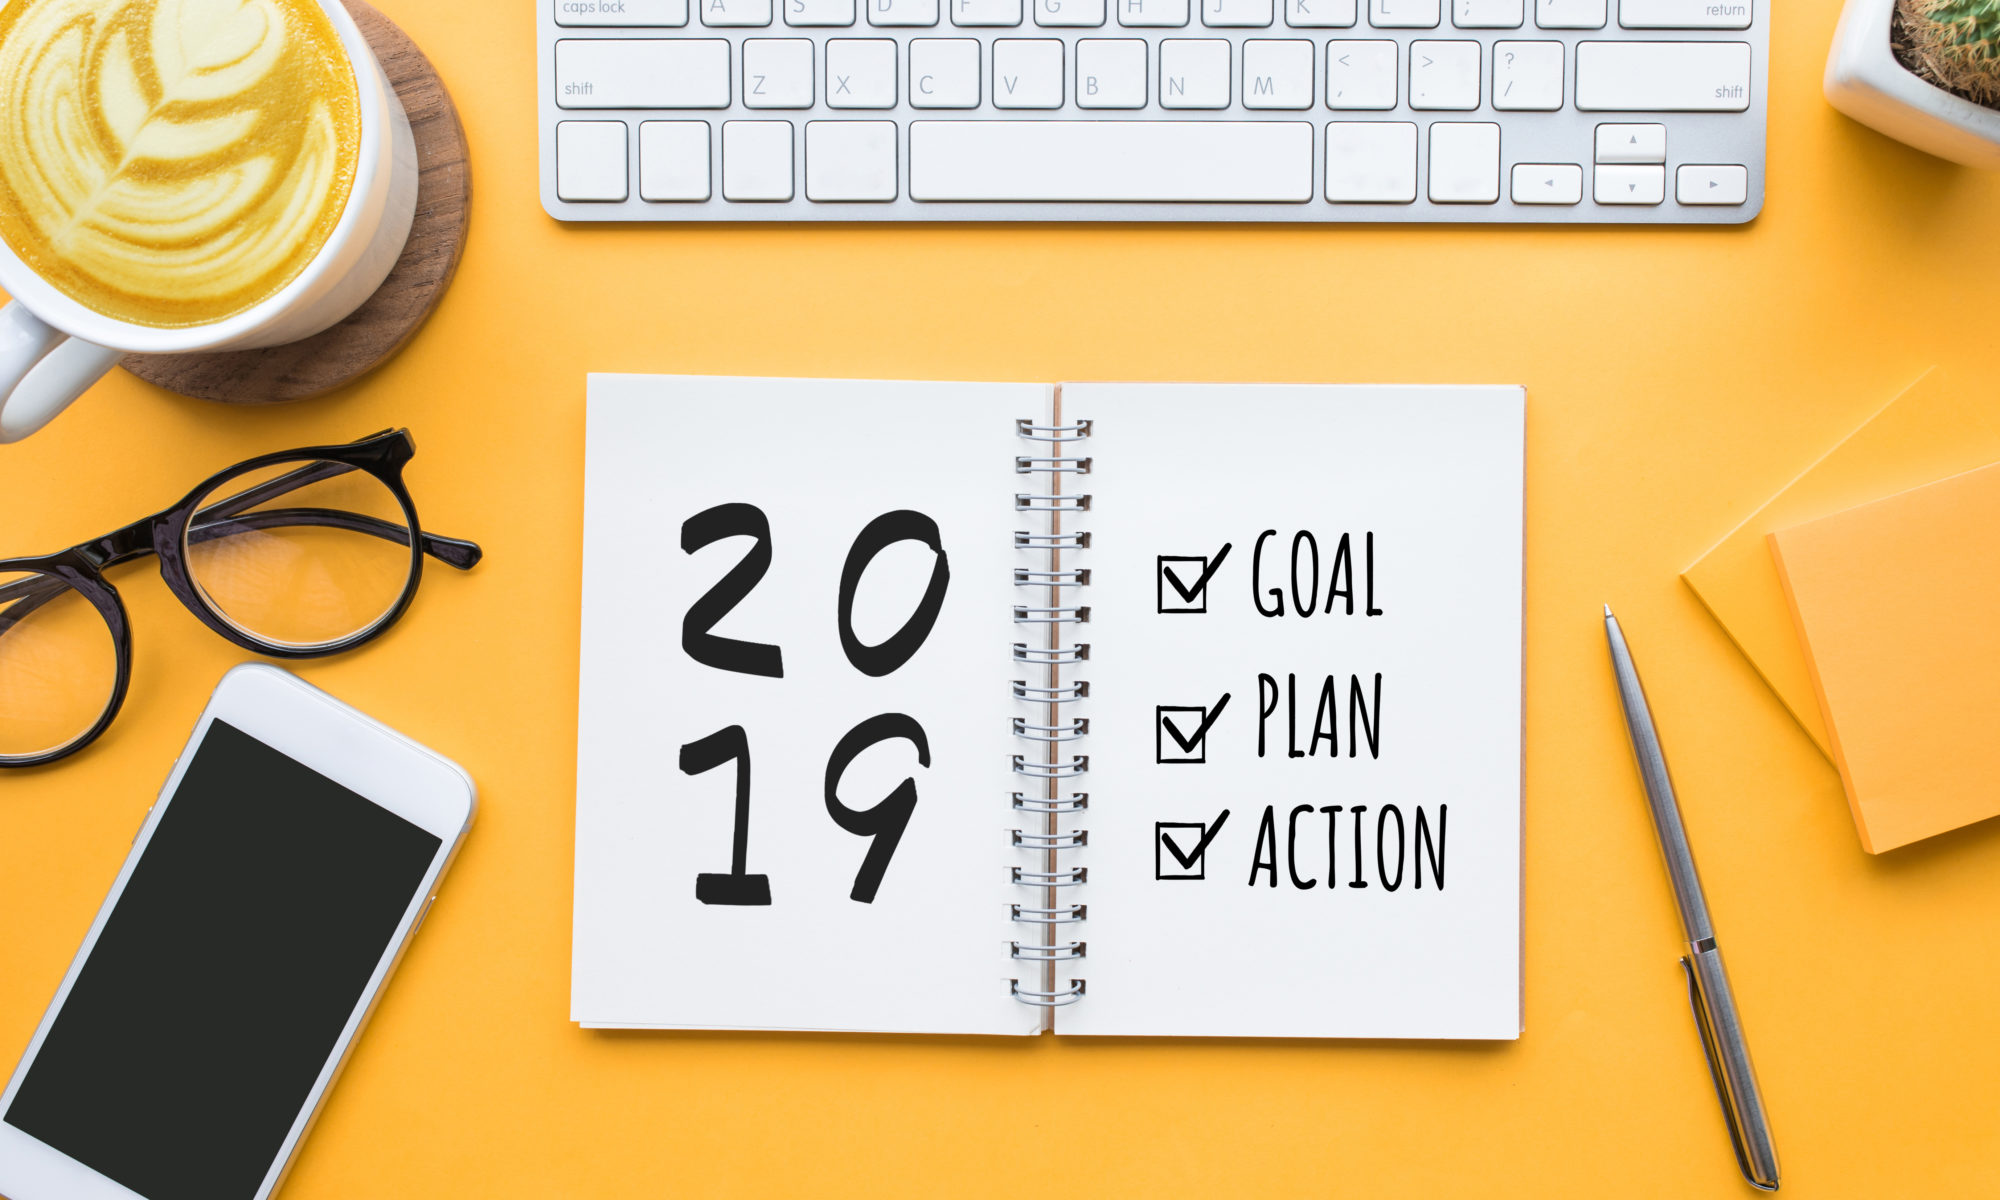 2019 planner with checklist for goals, plans, and actions